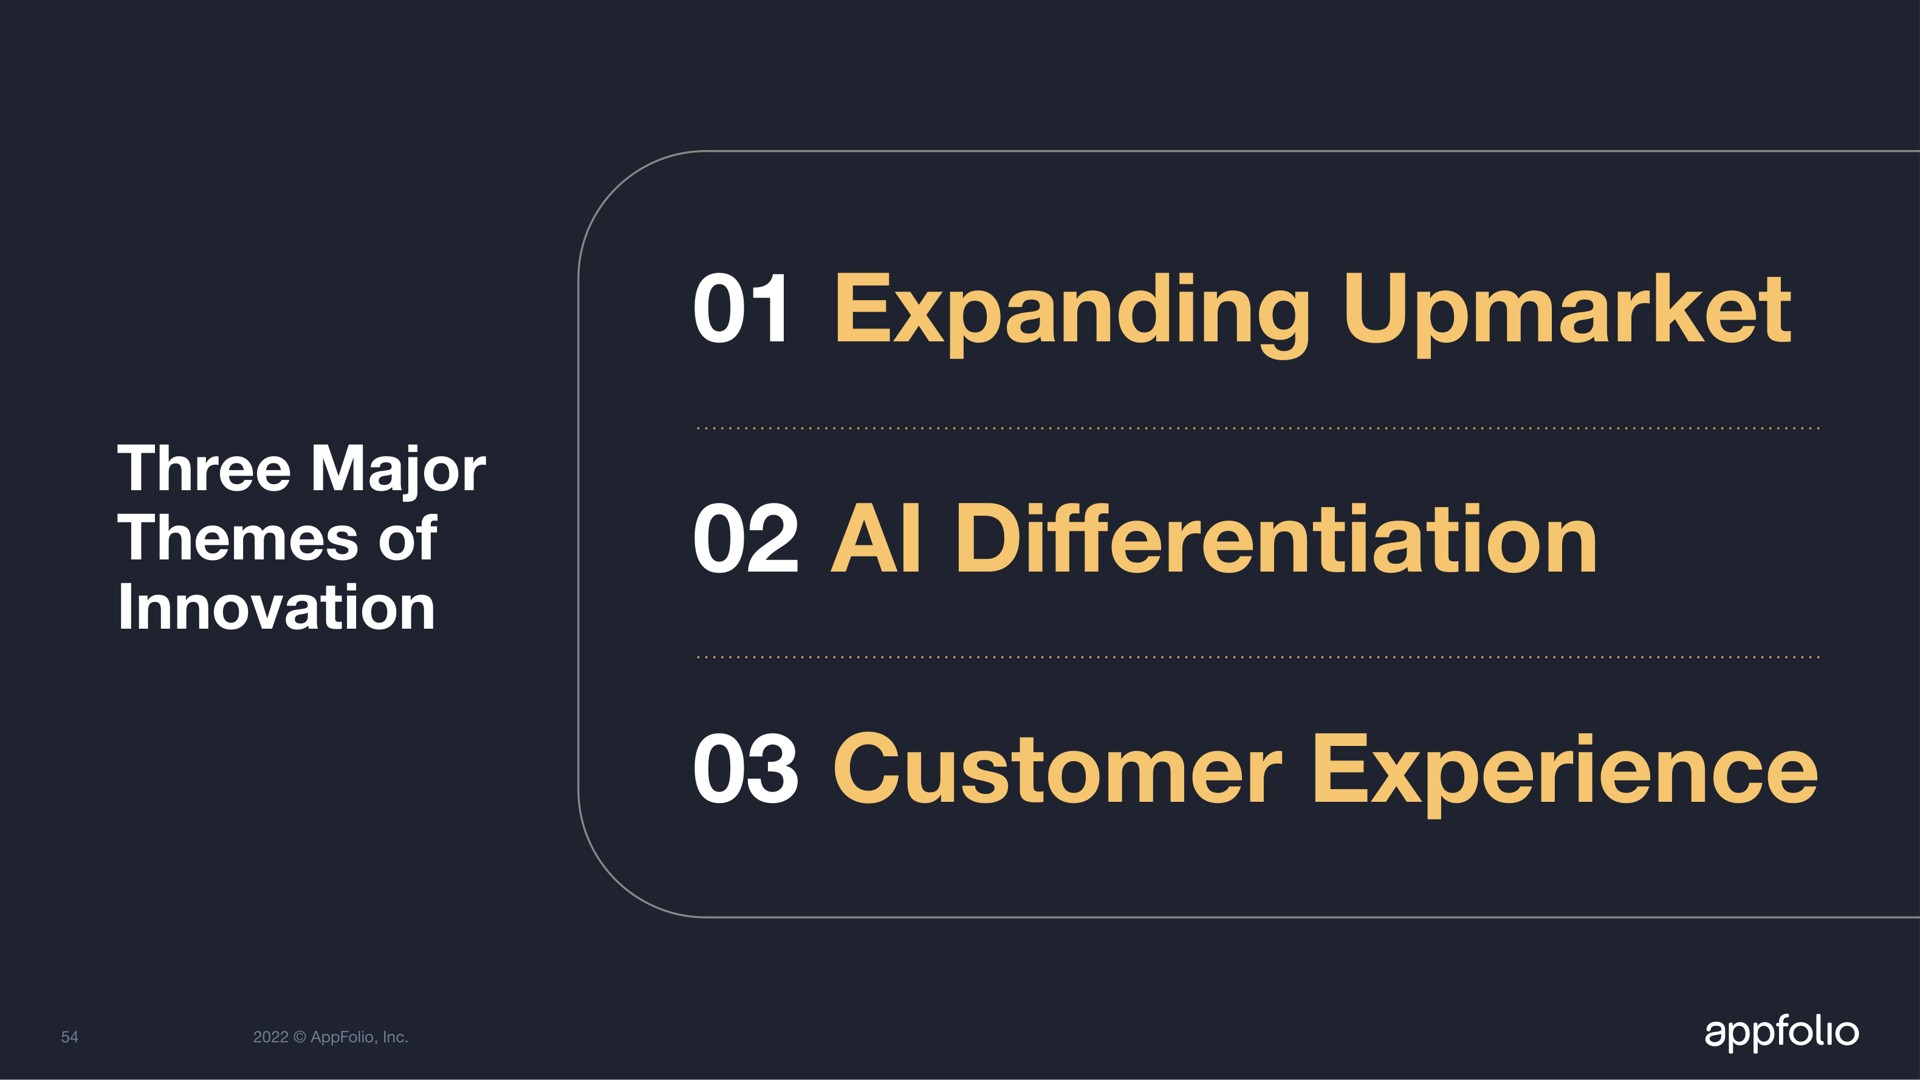 expanding three major themes of innovation customer experience a differentiation | AppFolio